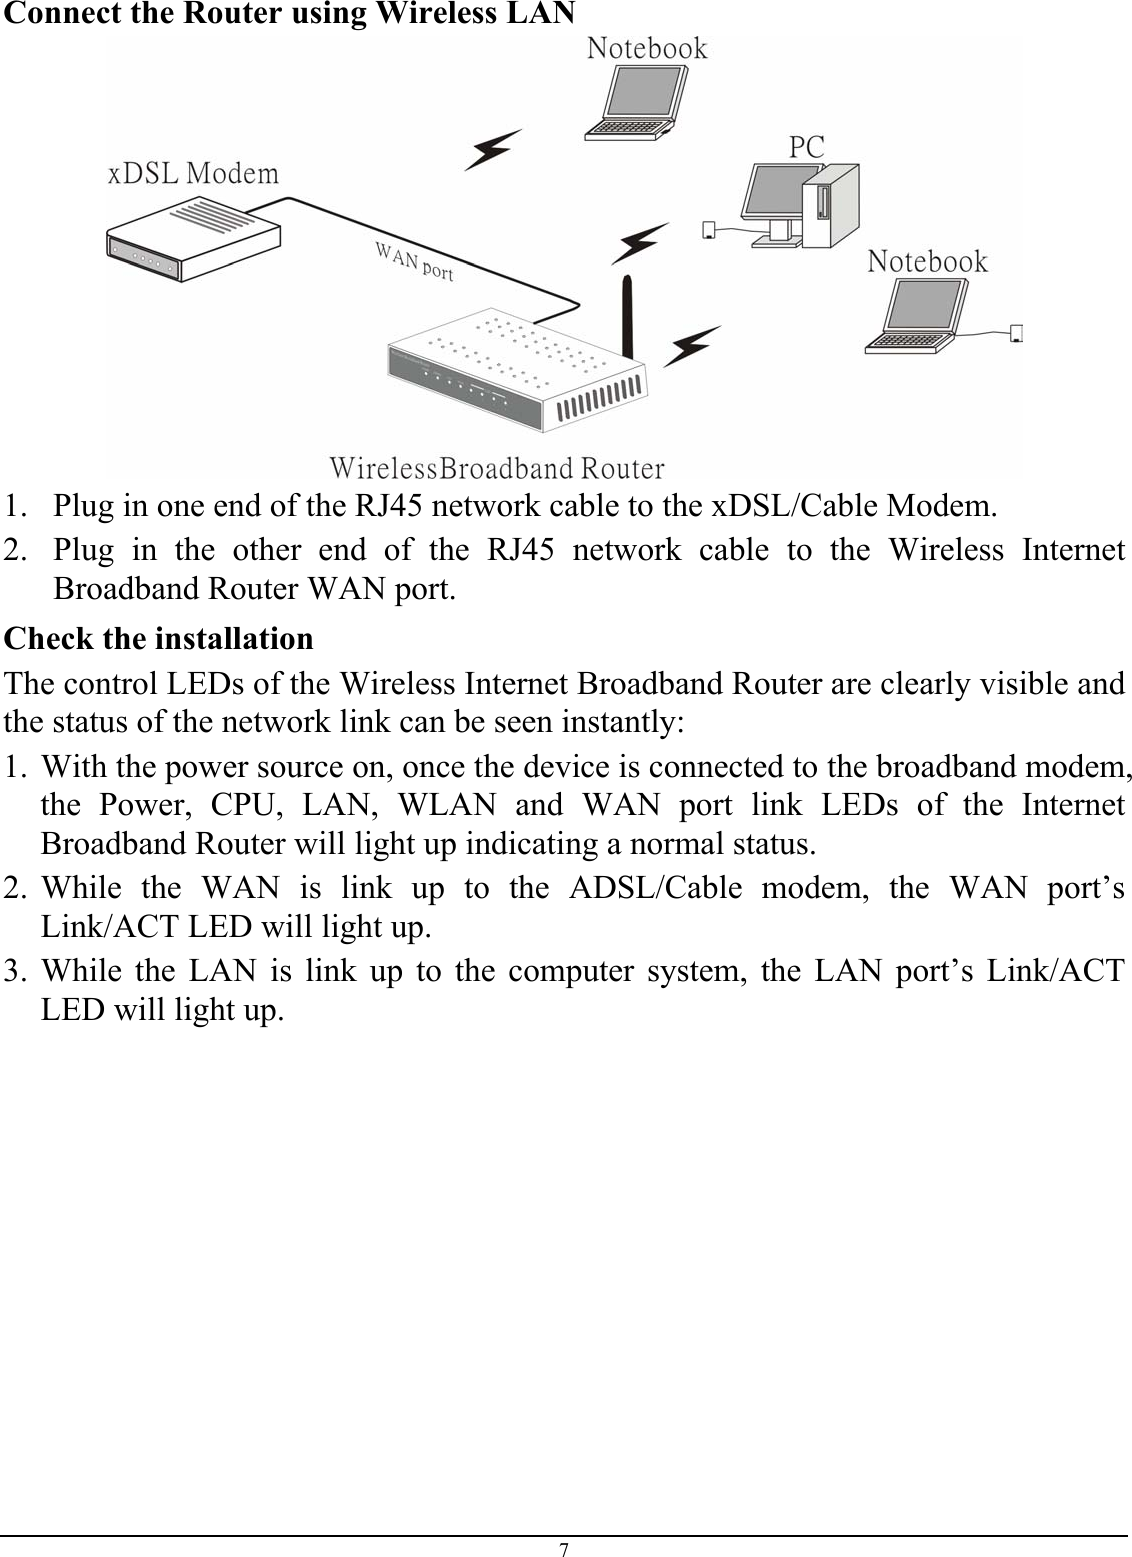 7 Connect the Router using Wireless LAN   1. Plug in one end of the RJ45 network cable to the xDSL/Cable Modem. 2. Plug in the other end of the RJ45 network cable to the Wireless Internet Broadband Router WAN port. Check the installation The control LEDs of the Wireless Internet Broadband Router are clearly visible and the status of the network link can be seen instantly: 1. With the power source on, once the device is connected to the broadband modem, the Power, CPU, LAN, WLAN and WAN port link LEDs of the Internet Broadband Router will light up indicating a normal status. 2. While the WAN is link up to the ADSL/Cable modem, the WAN port’s Link/ACT LED will light up. 3. While the LAN is link up to the computer system, the LAN port’s Link/ACT LED will light up.  